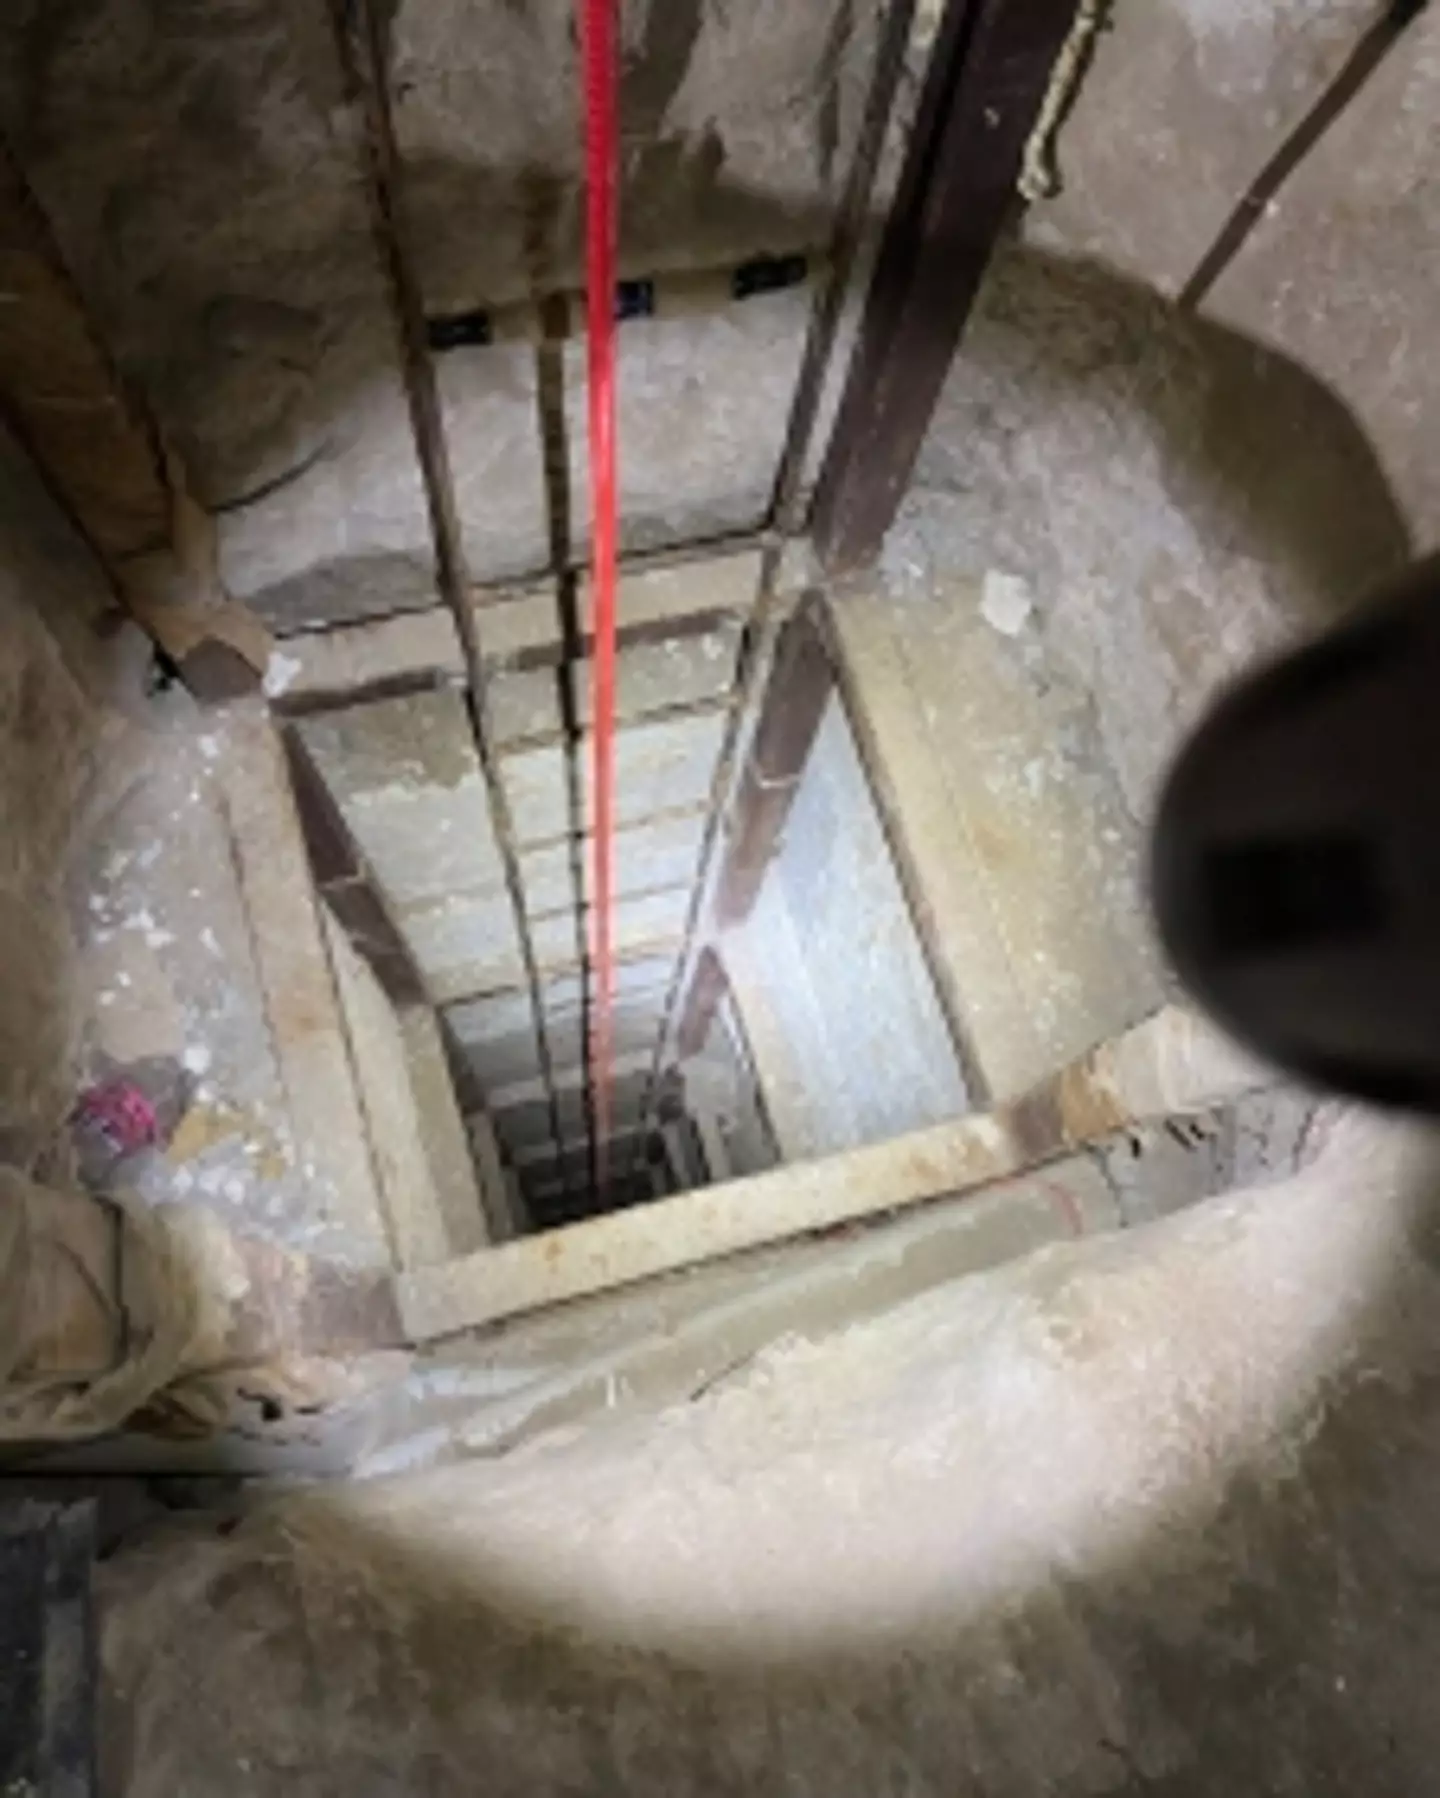 The tunnel was found via a carved out hole in a warehouse.